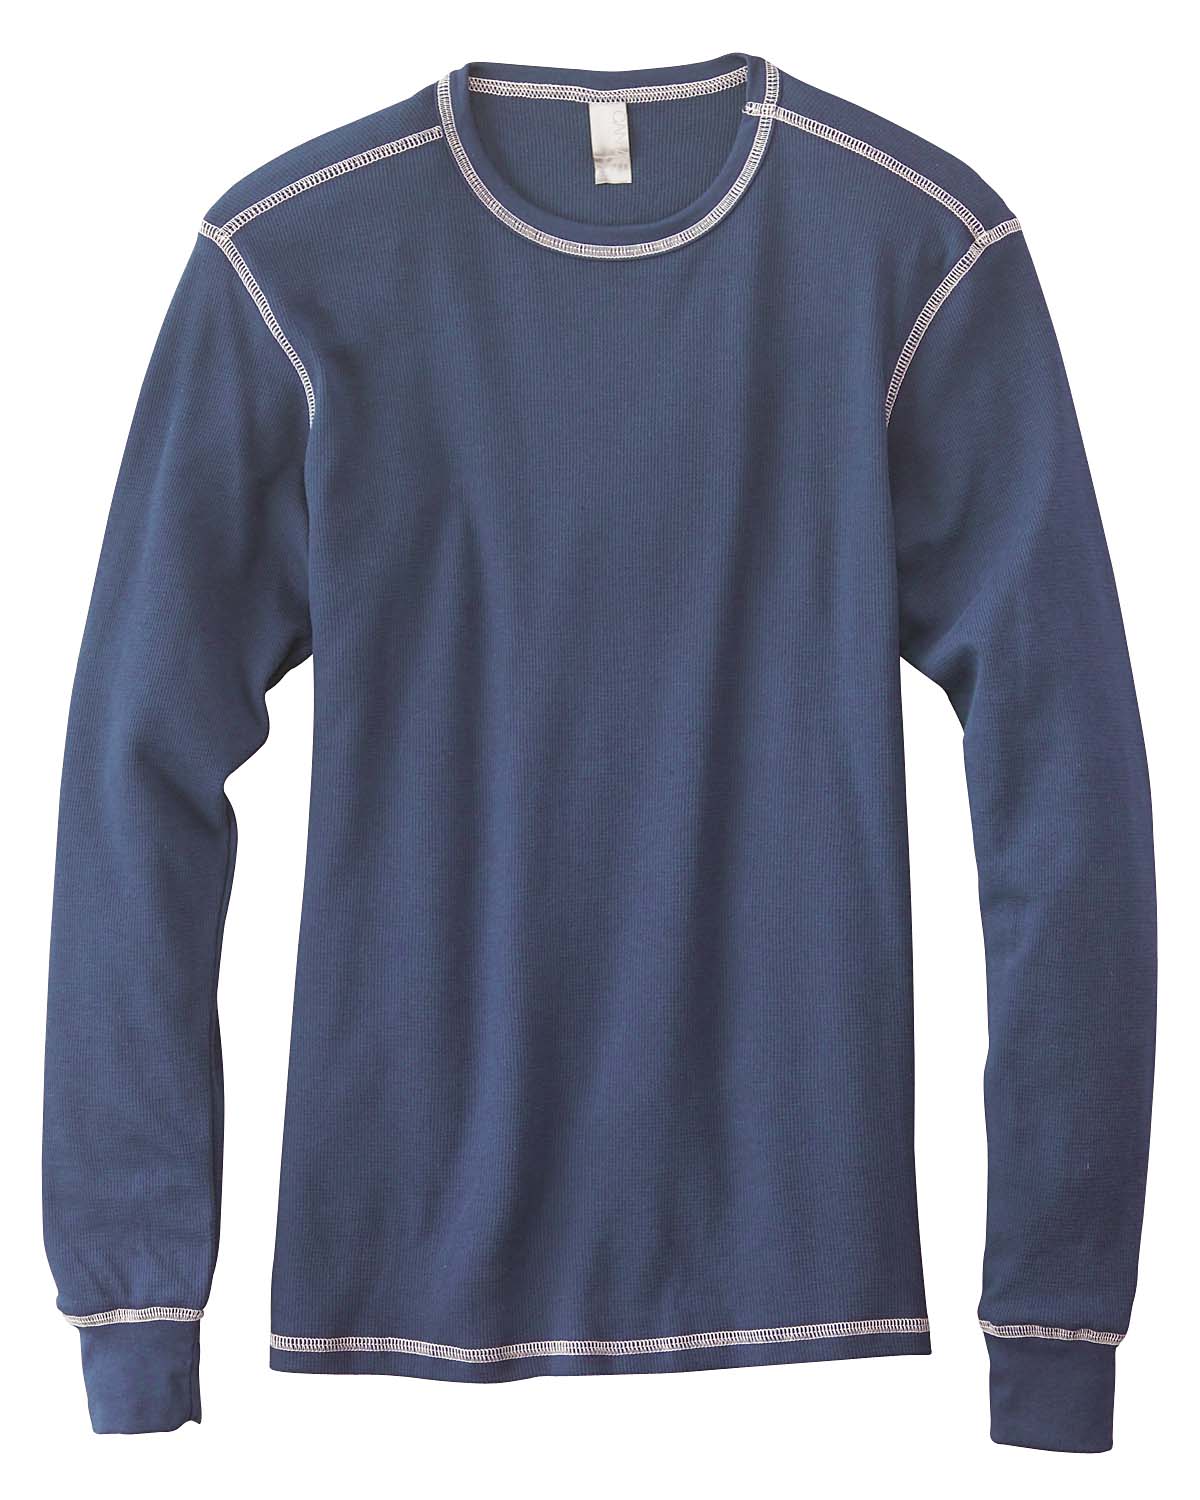 Canvas Contrasting Stitch Long Sleeve Thermal